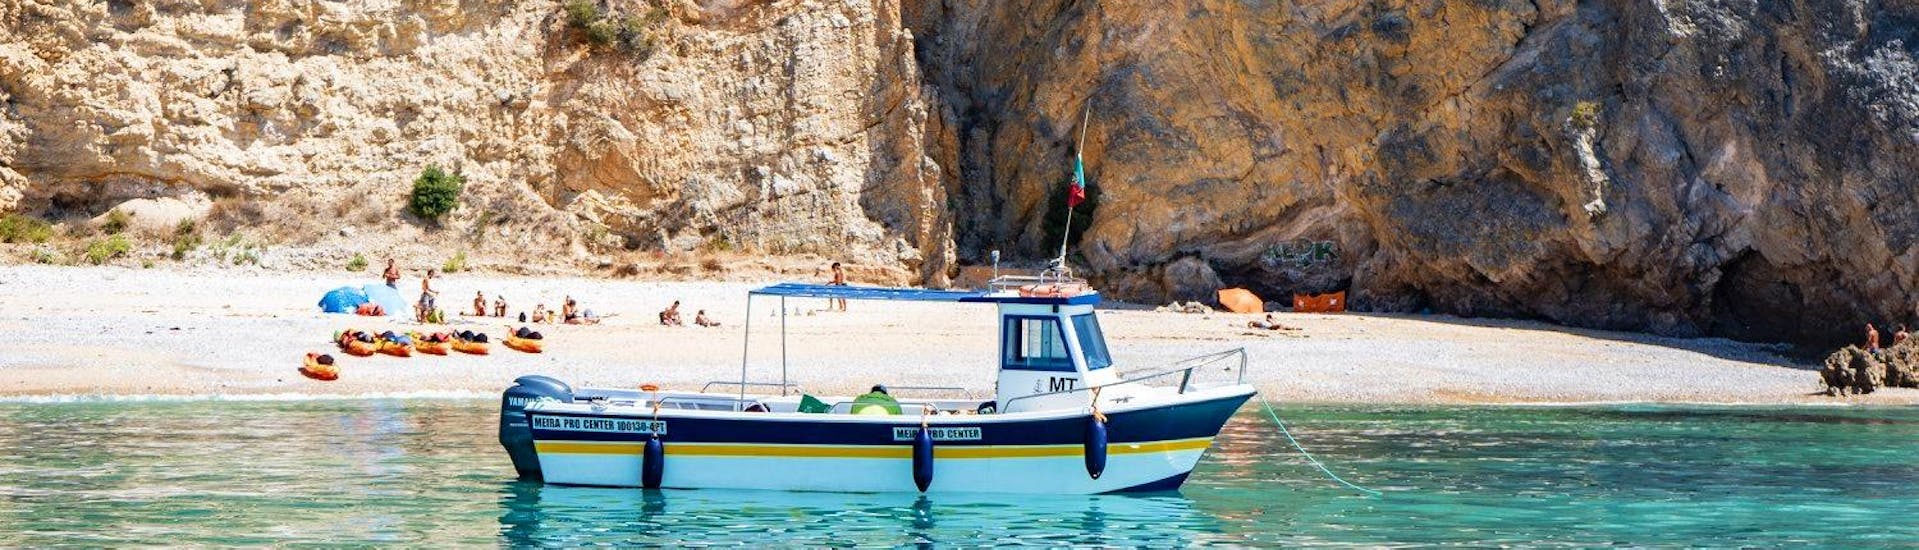 During the Boat Trip to the Wild Beaches of Arrábida Natural Park with Meira Pro Center Sesimbra, the boat is anchored in front of a beach, where the participants can relax and enjoy the clear water.